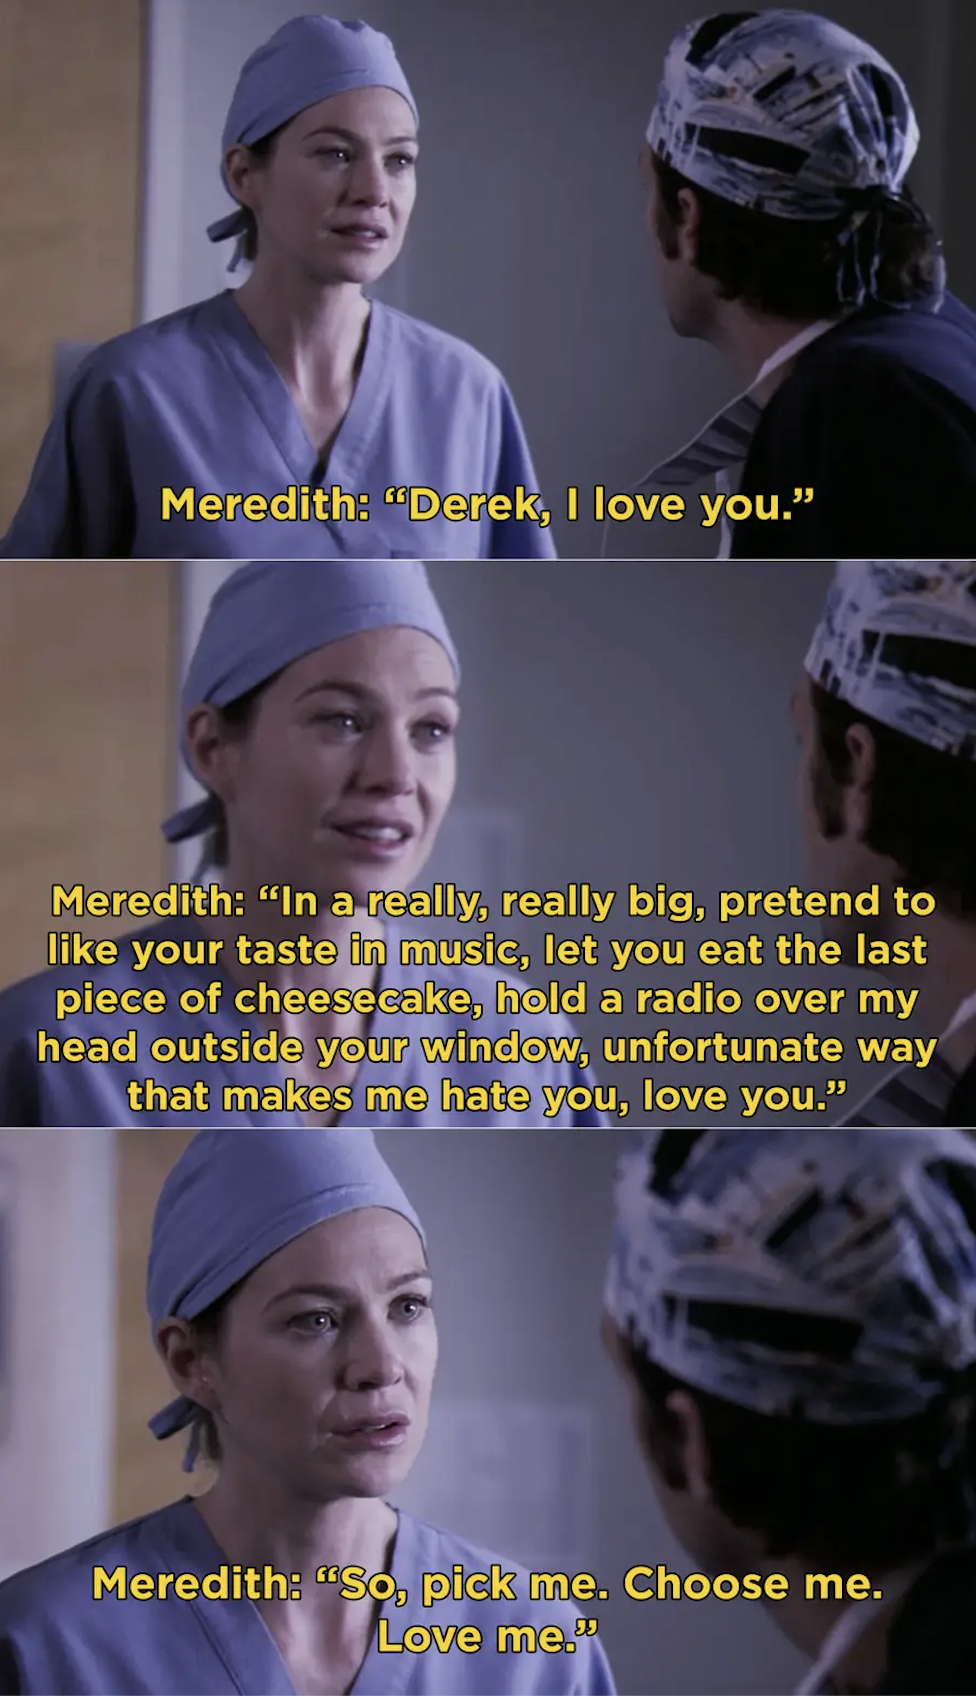 Meredith: &quot;Derek, I love you. In a really really big, pretend to like your taste of music, let you eat my last piece of cheesecake, hold a radio over my head outside your window, unfortunate way that makes me hate you, love you.&quot;